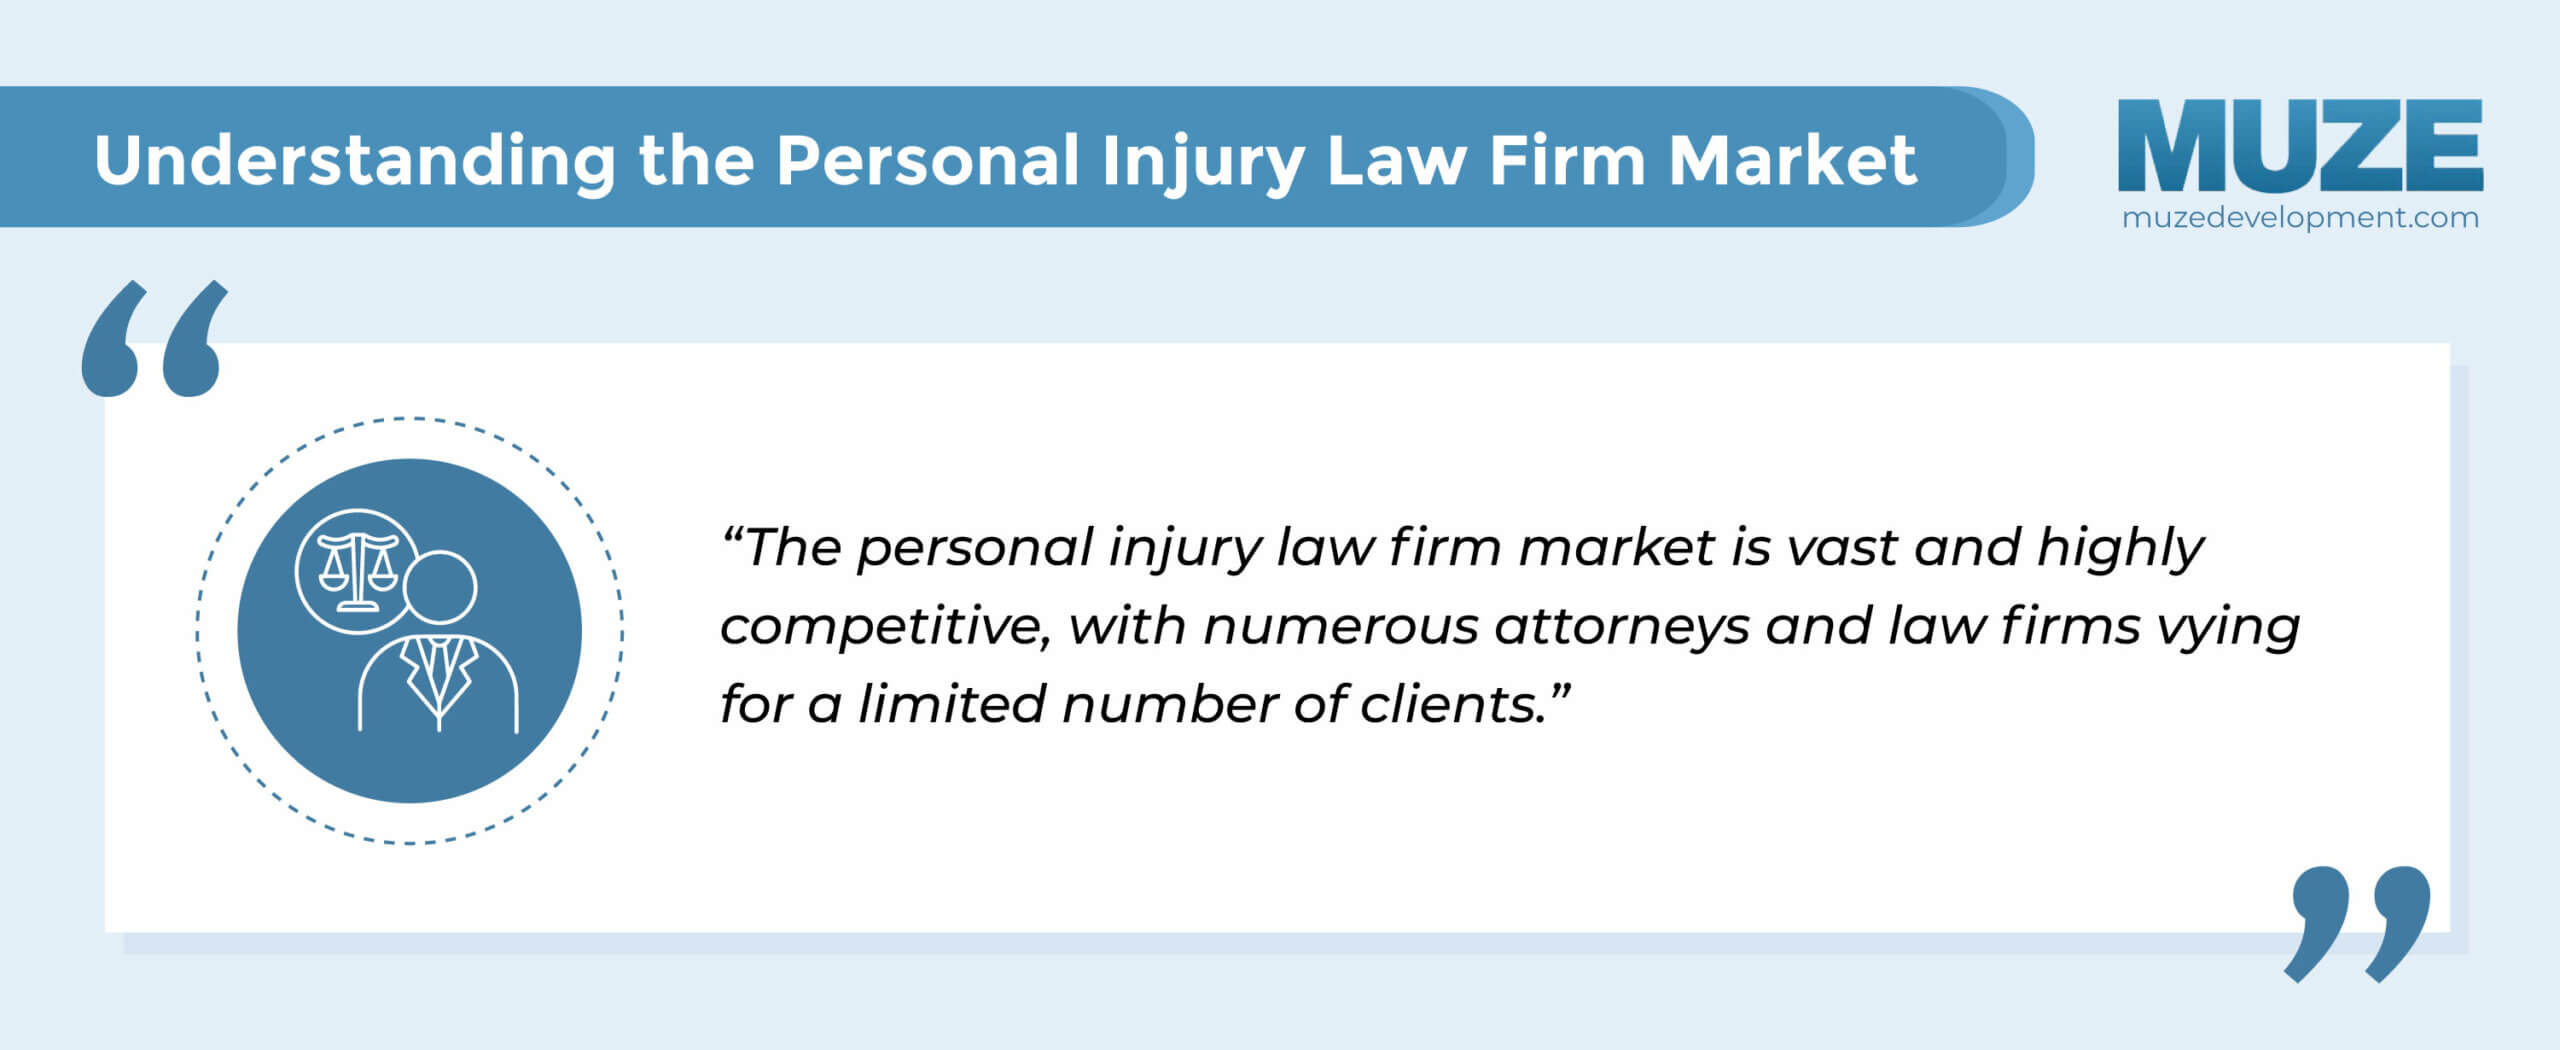 Understanding the Personal Injury Law Firm Market